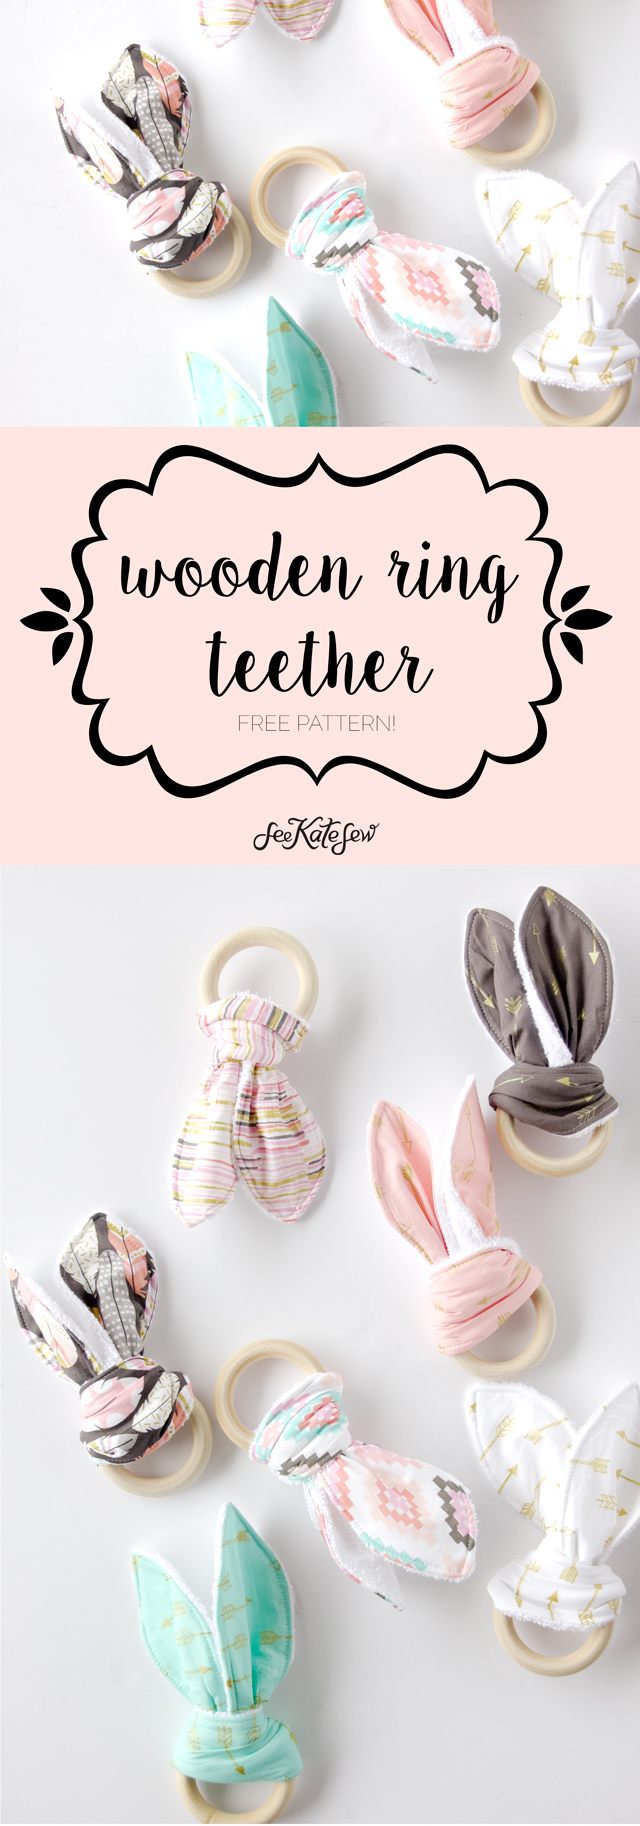 3 Simple Wooden Ring Teether